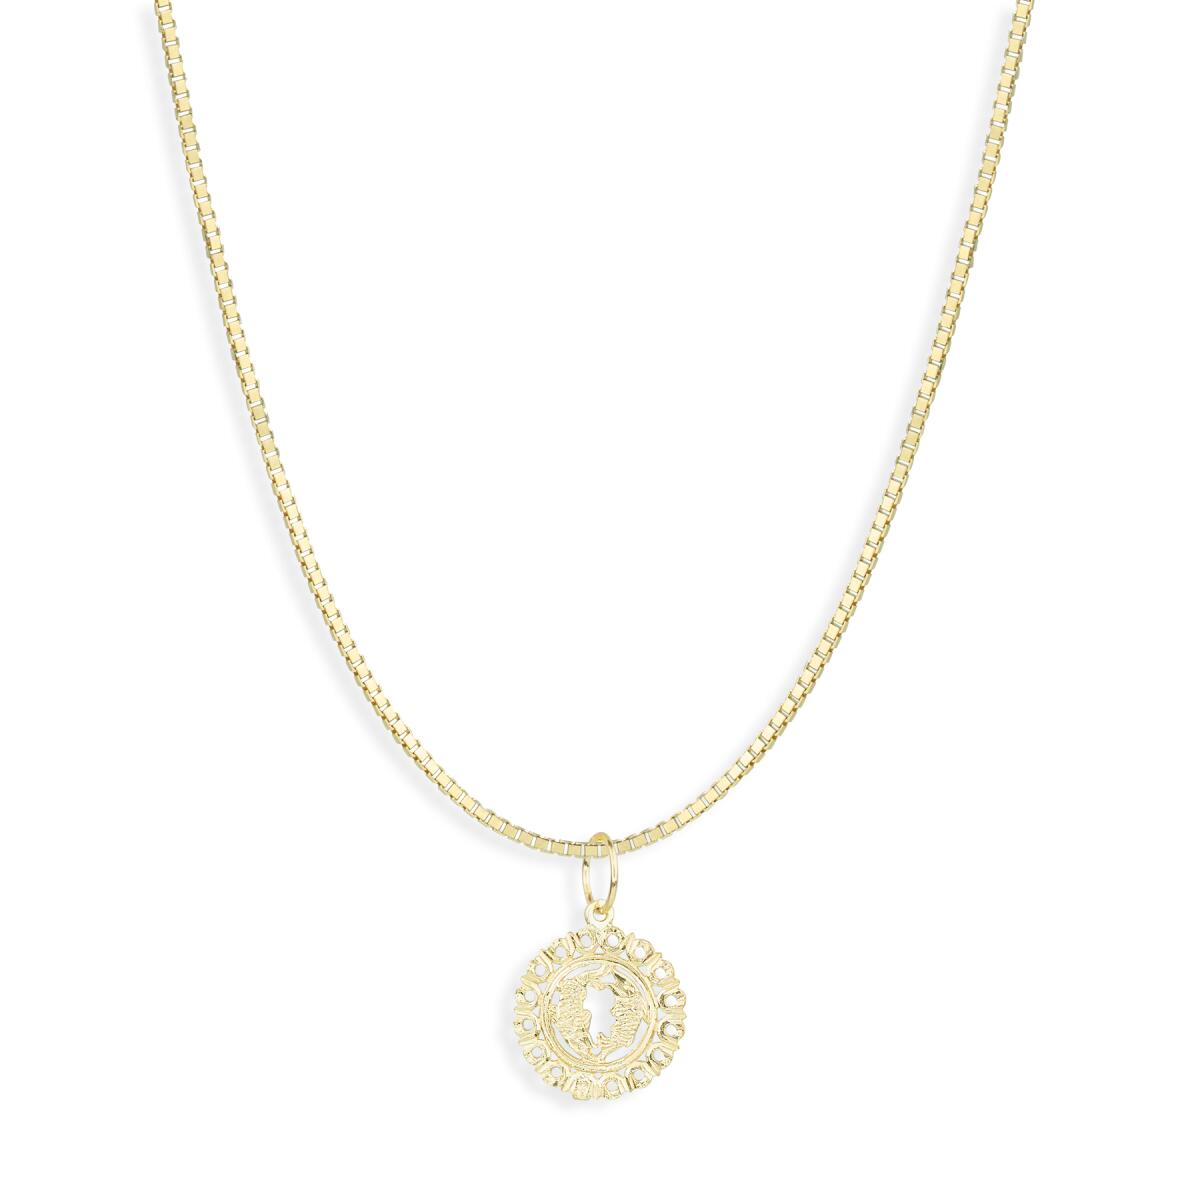 A yellow gold chain with a Pisces pendant